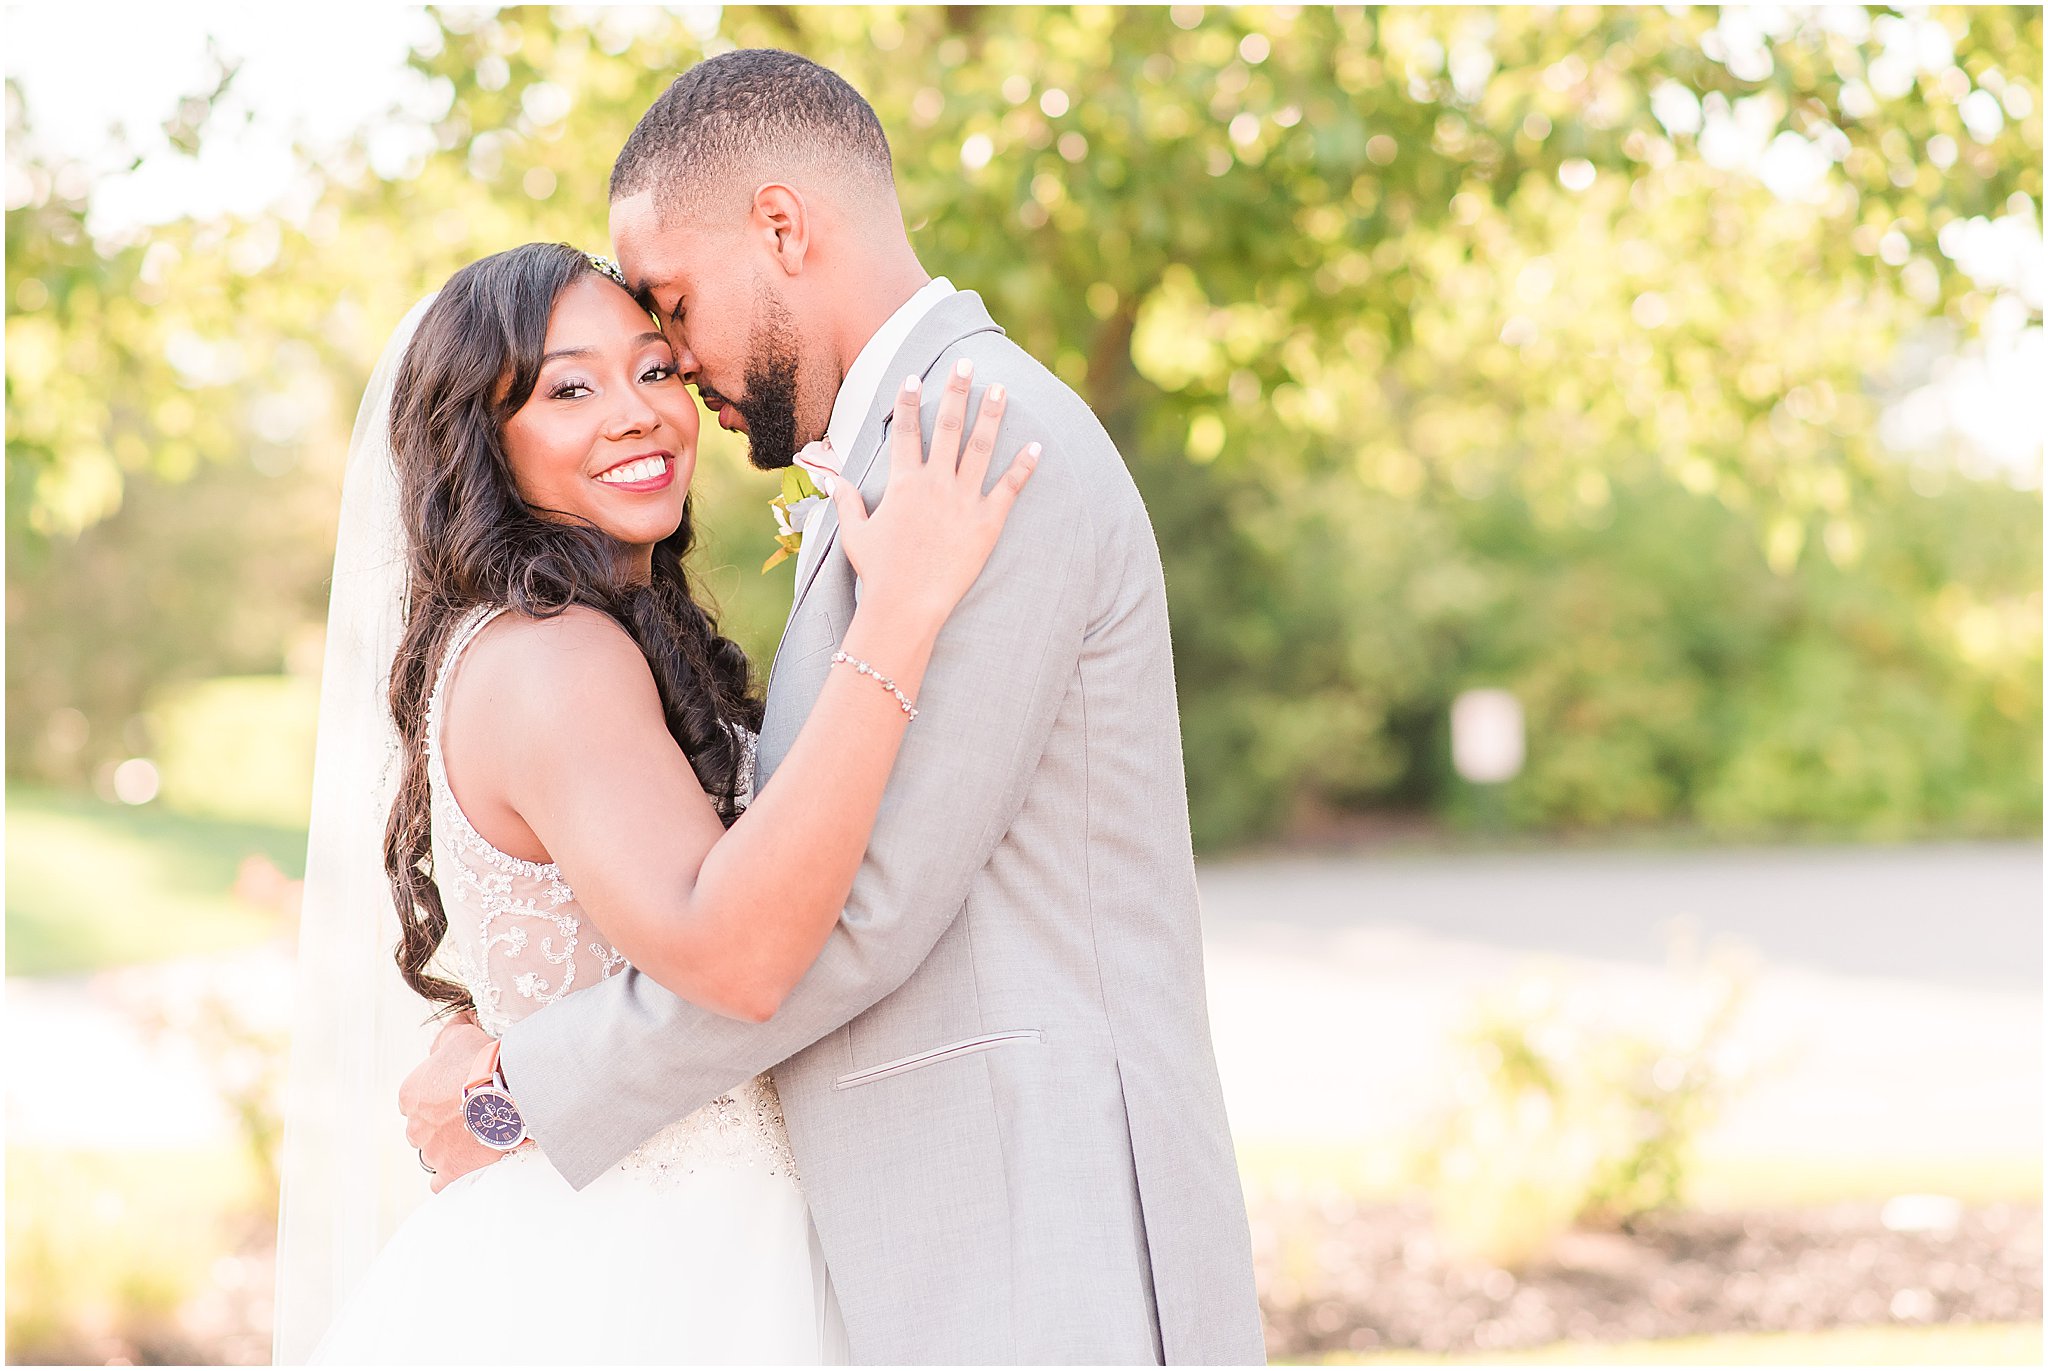 Bride and groom portraits at Pinnacle Golf Club | Courtney Carney Photography